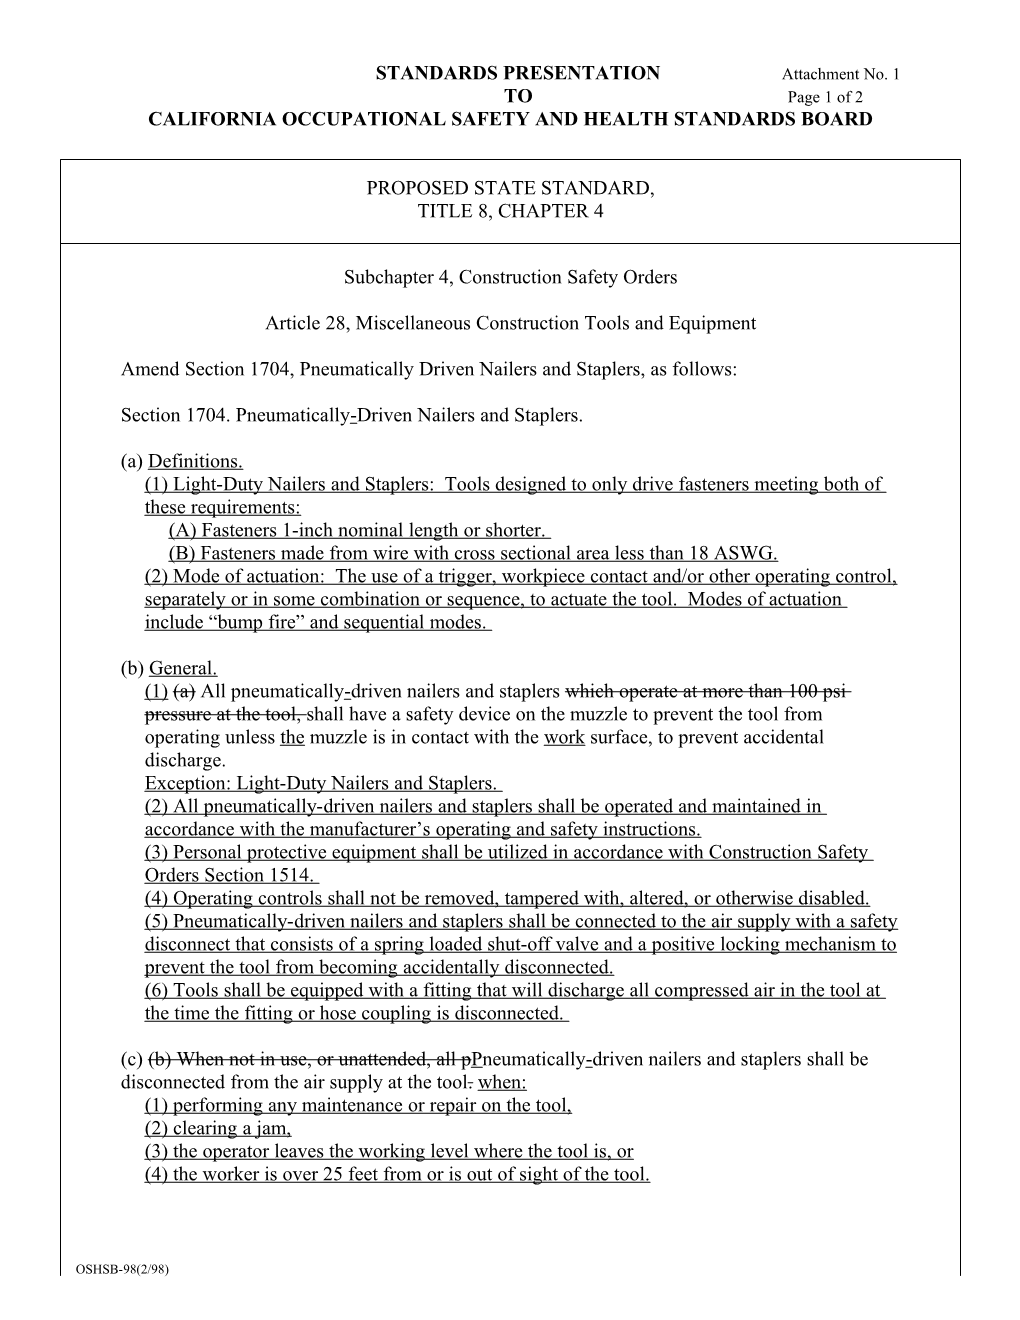 Subchapter 4, Construction Safety Orders